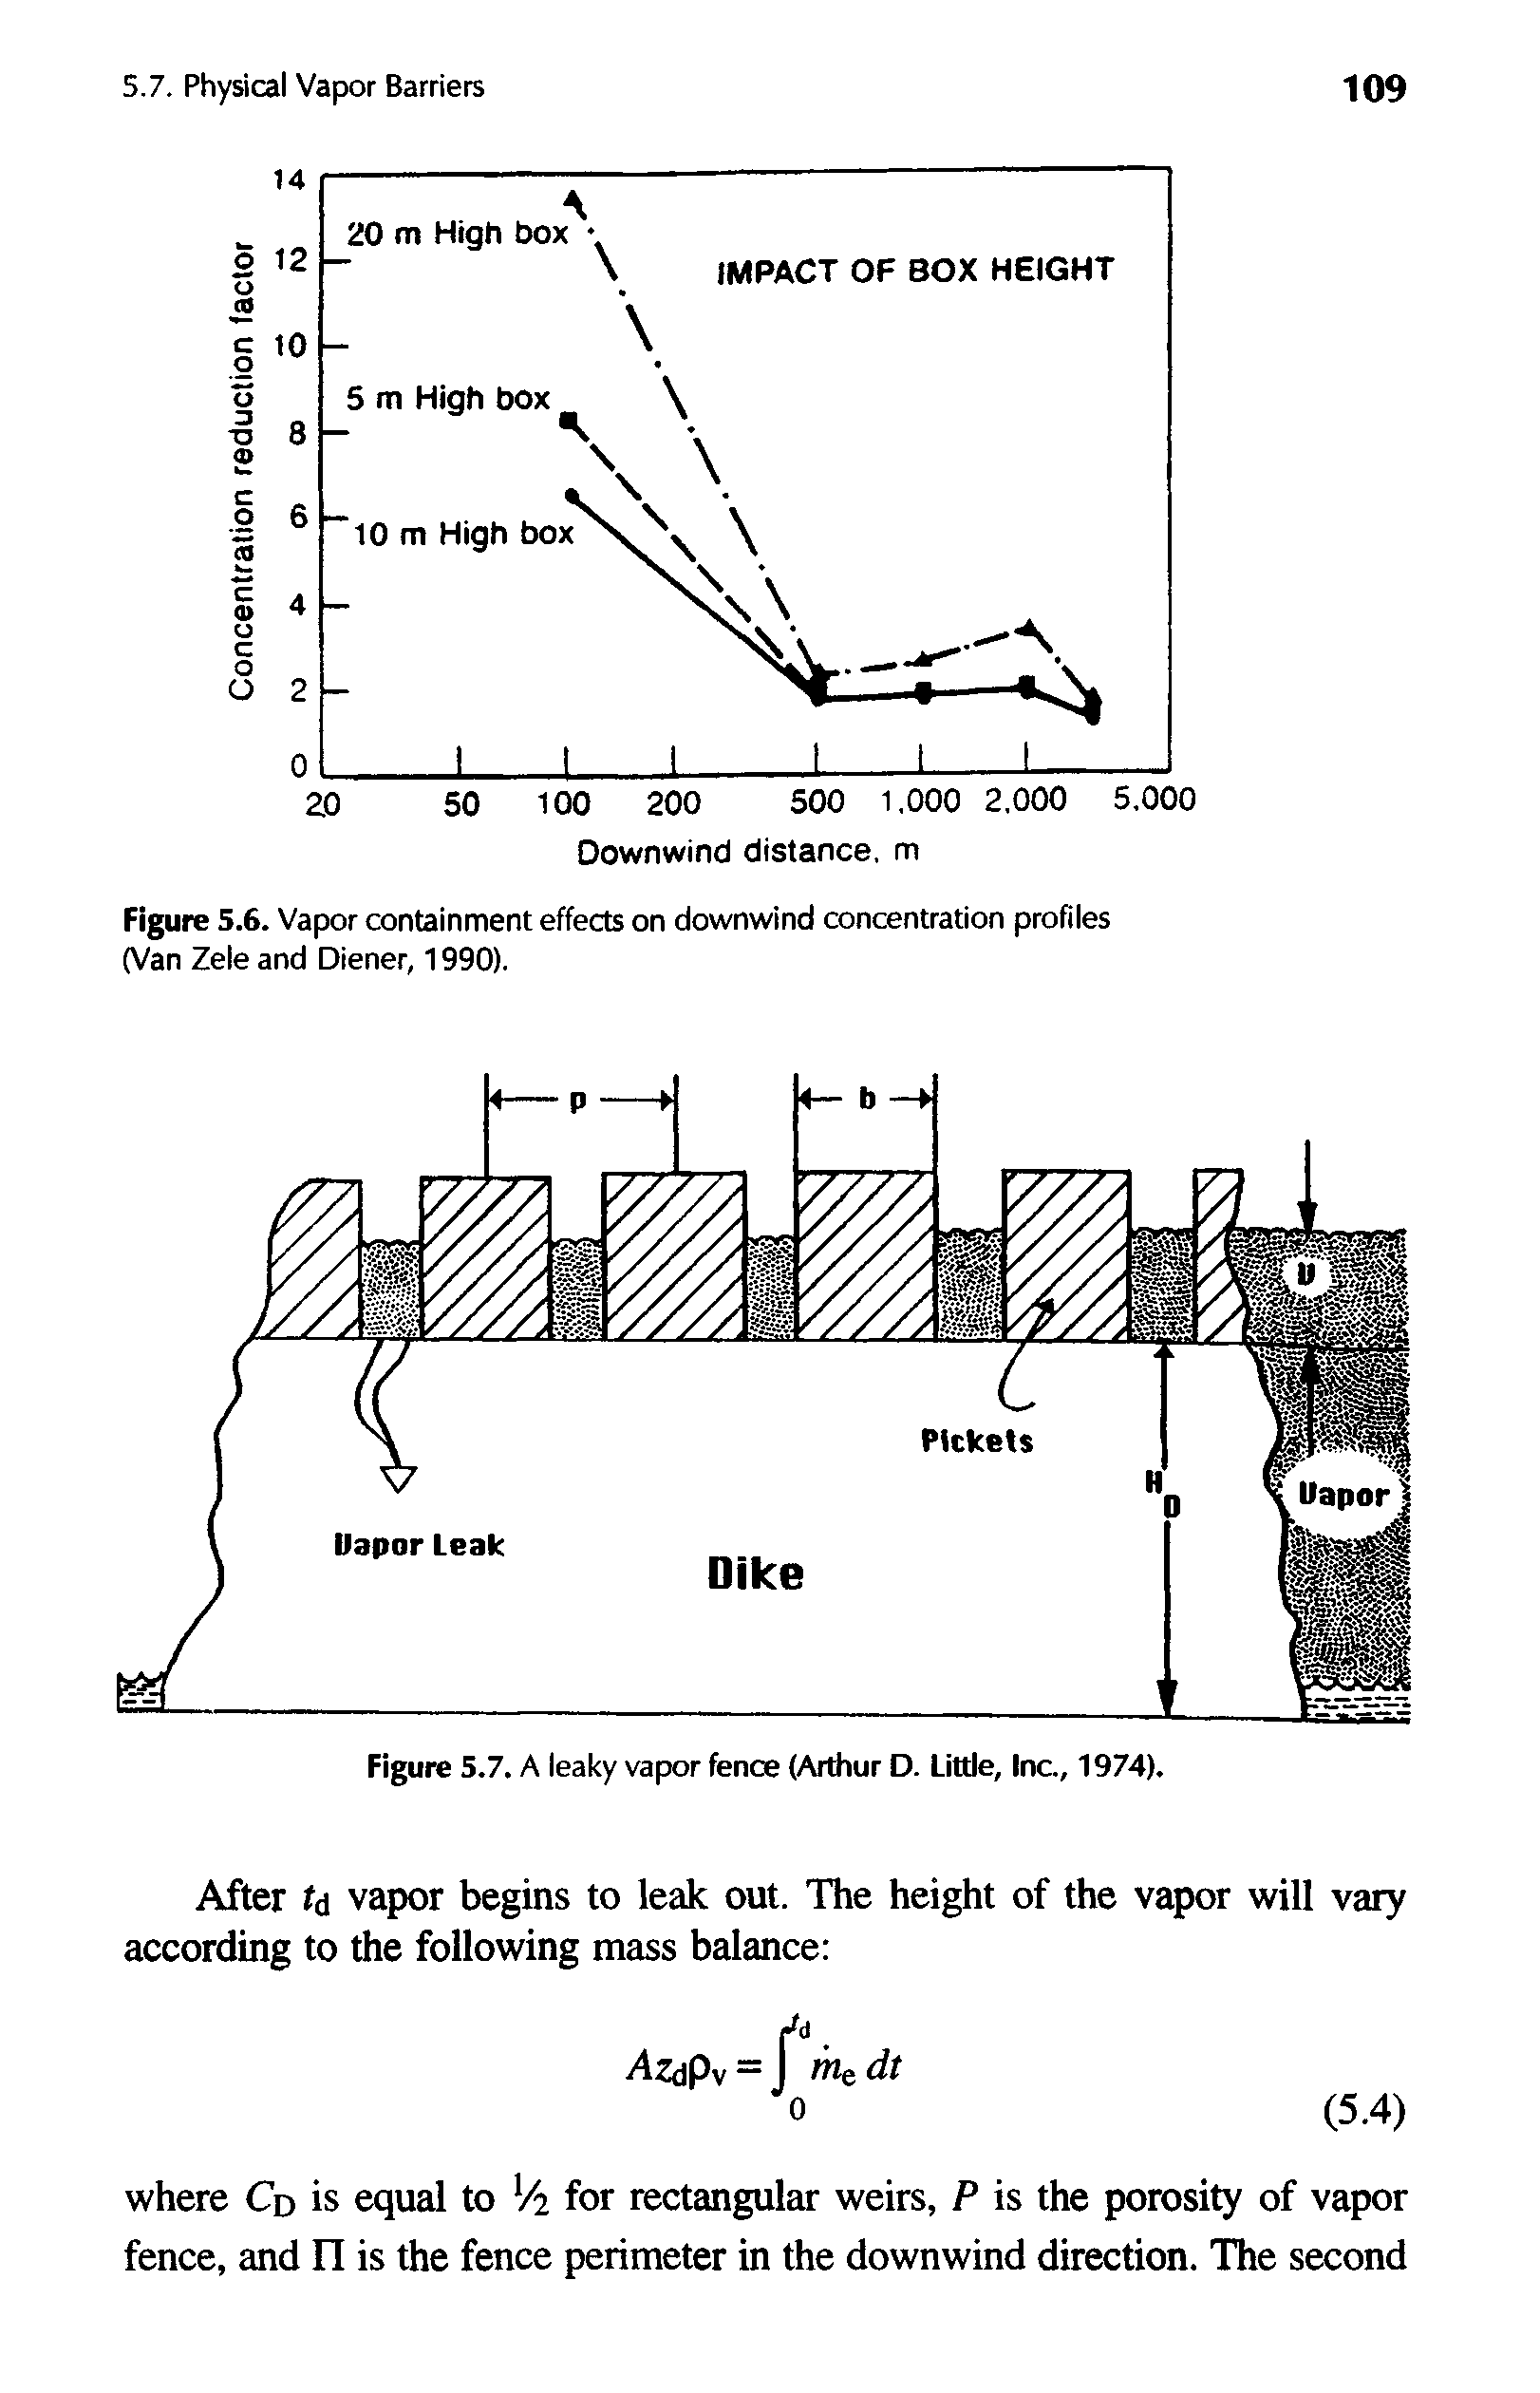 Figure 5.6. Vapor containment effects on downwind concentration profiles (Van Zele and Diener, 1990).